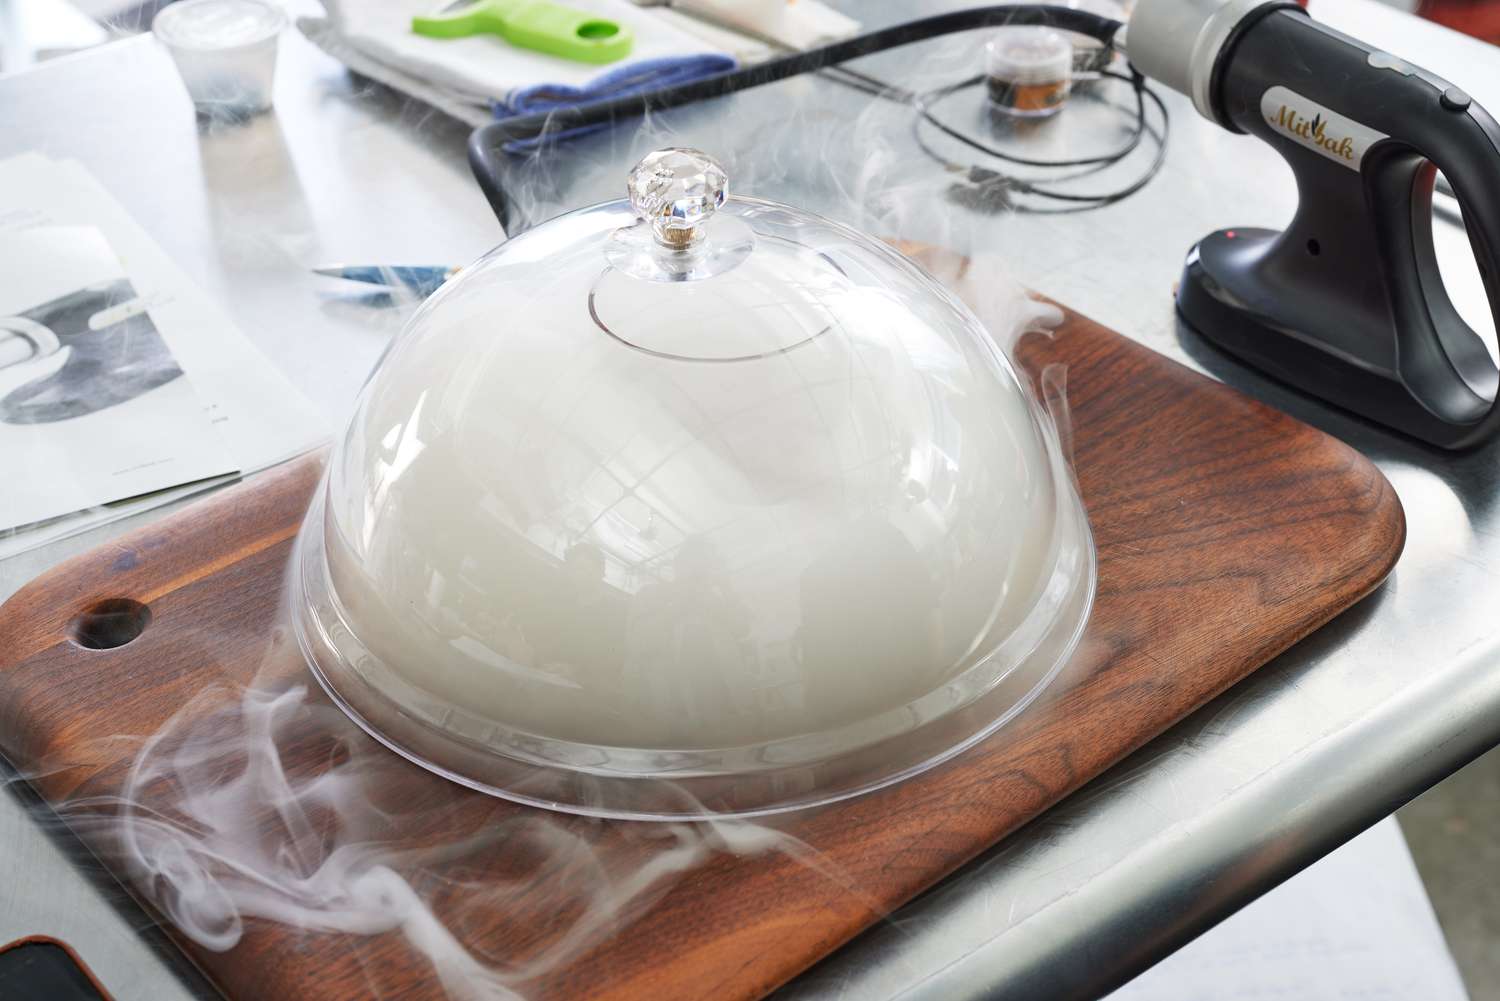 A large cloche containing the smoke from a smoking gun